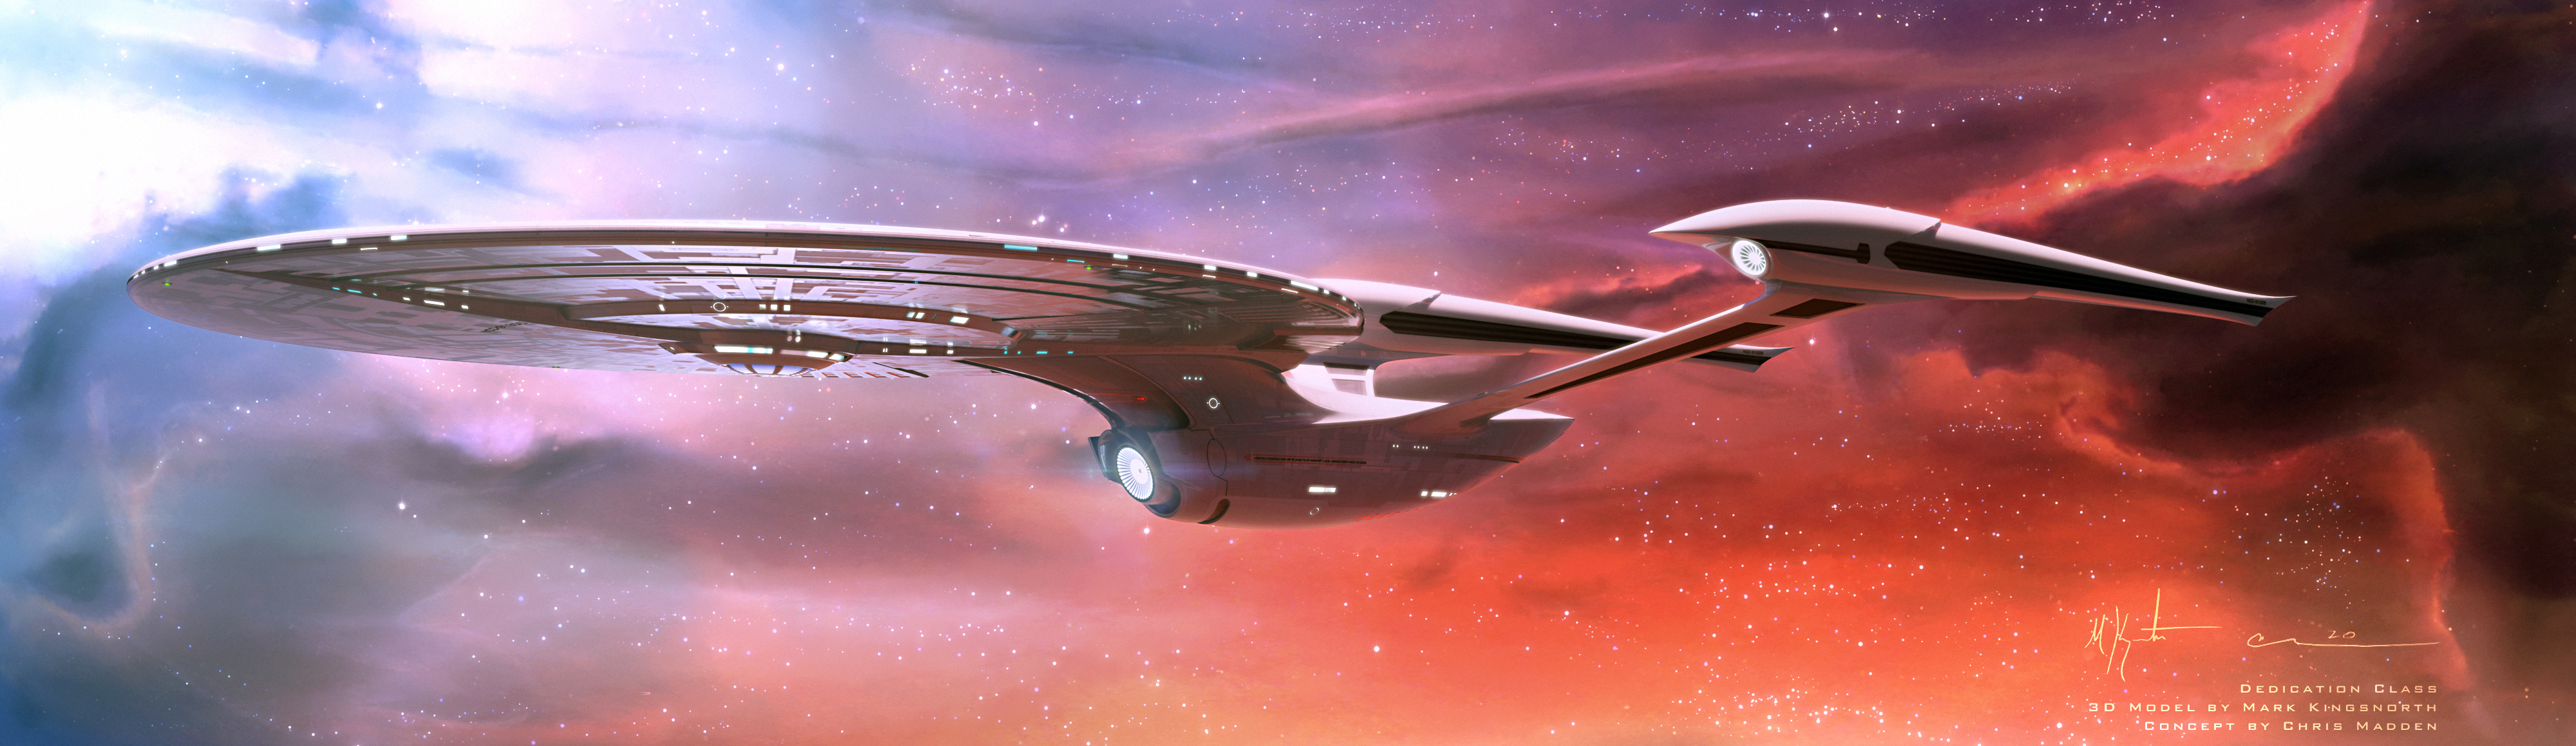 enterprise-f-concept-dedication-class-by-markkingsnorth-4000-1159